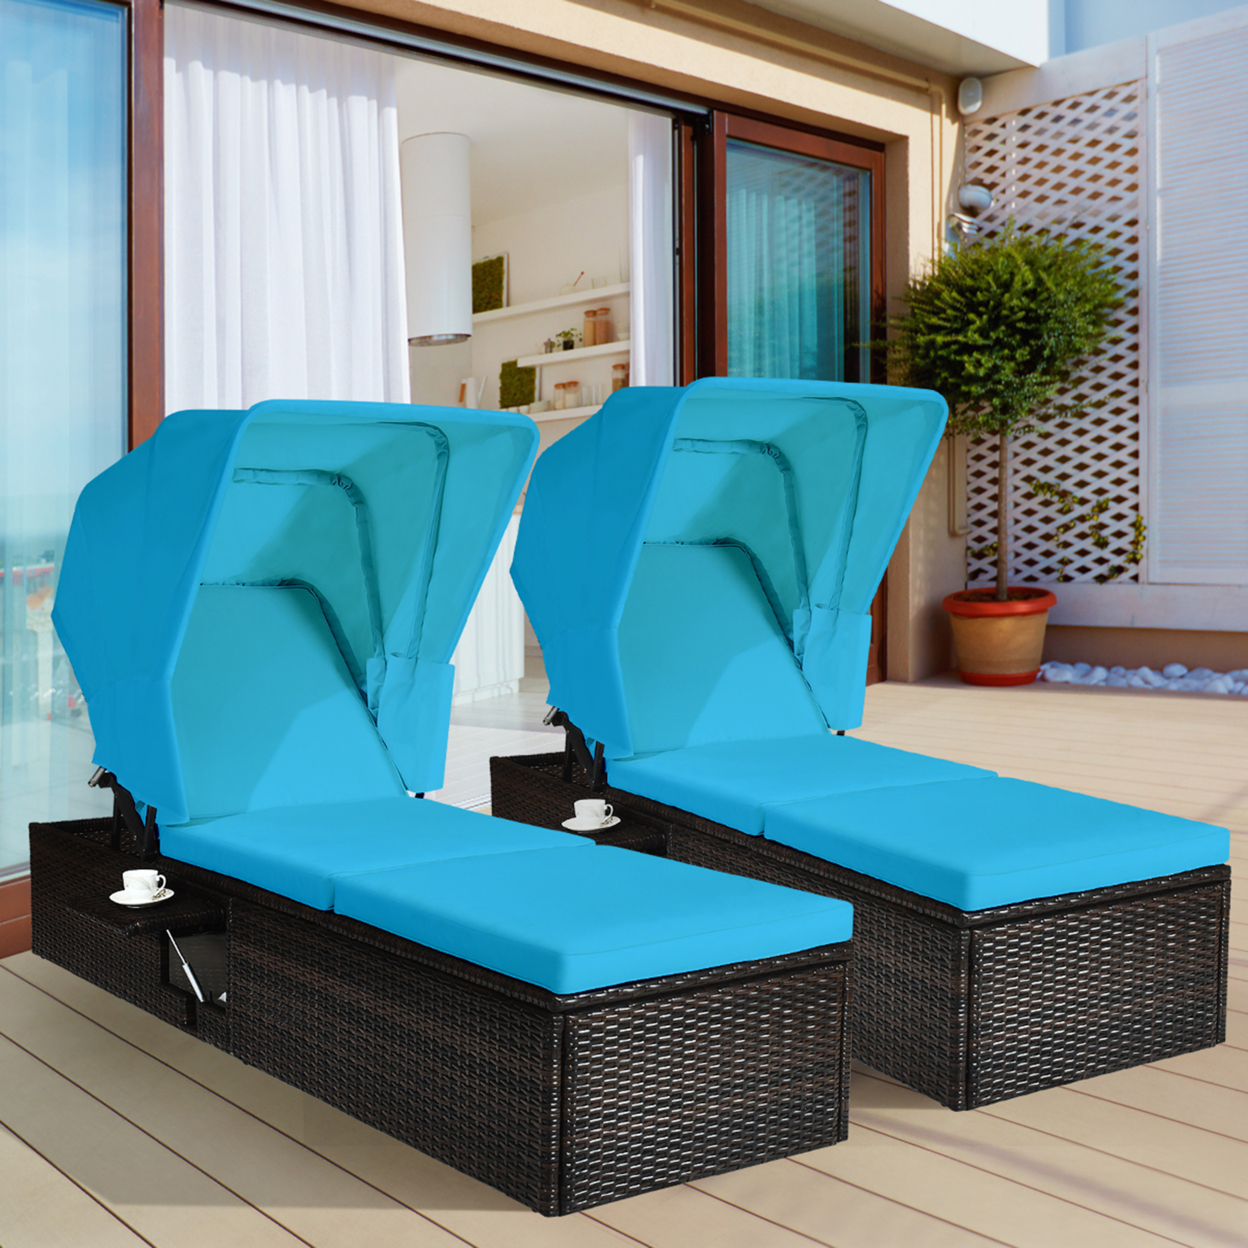 2PCS Rattan Patio Chaise Lounge Chair W/ Adjustable Canopy Turquoise Cushion